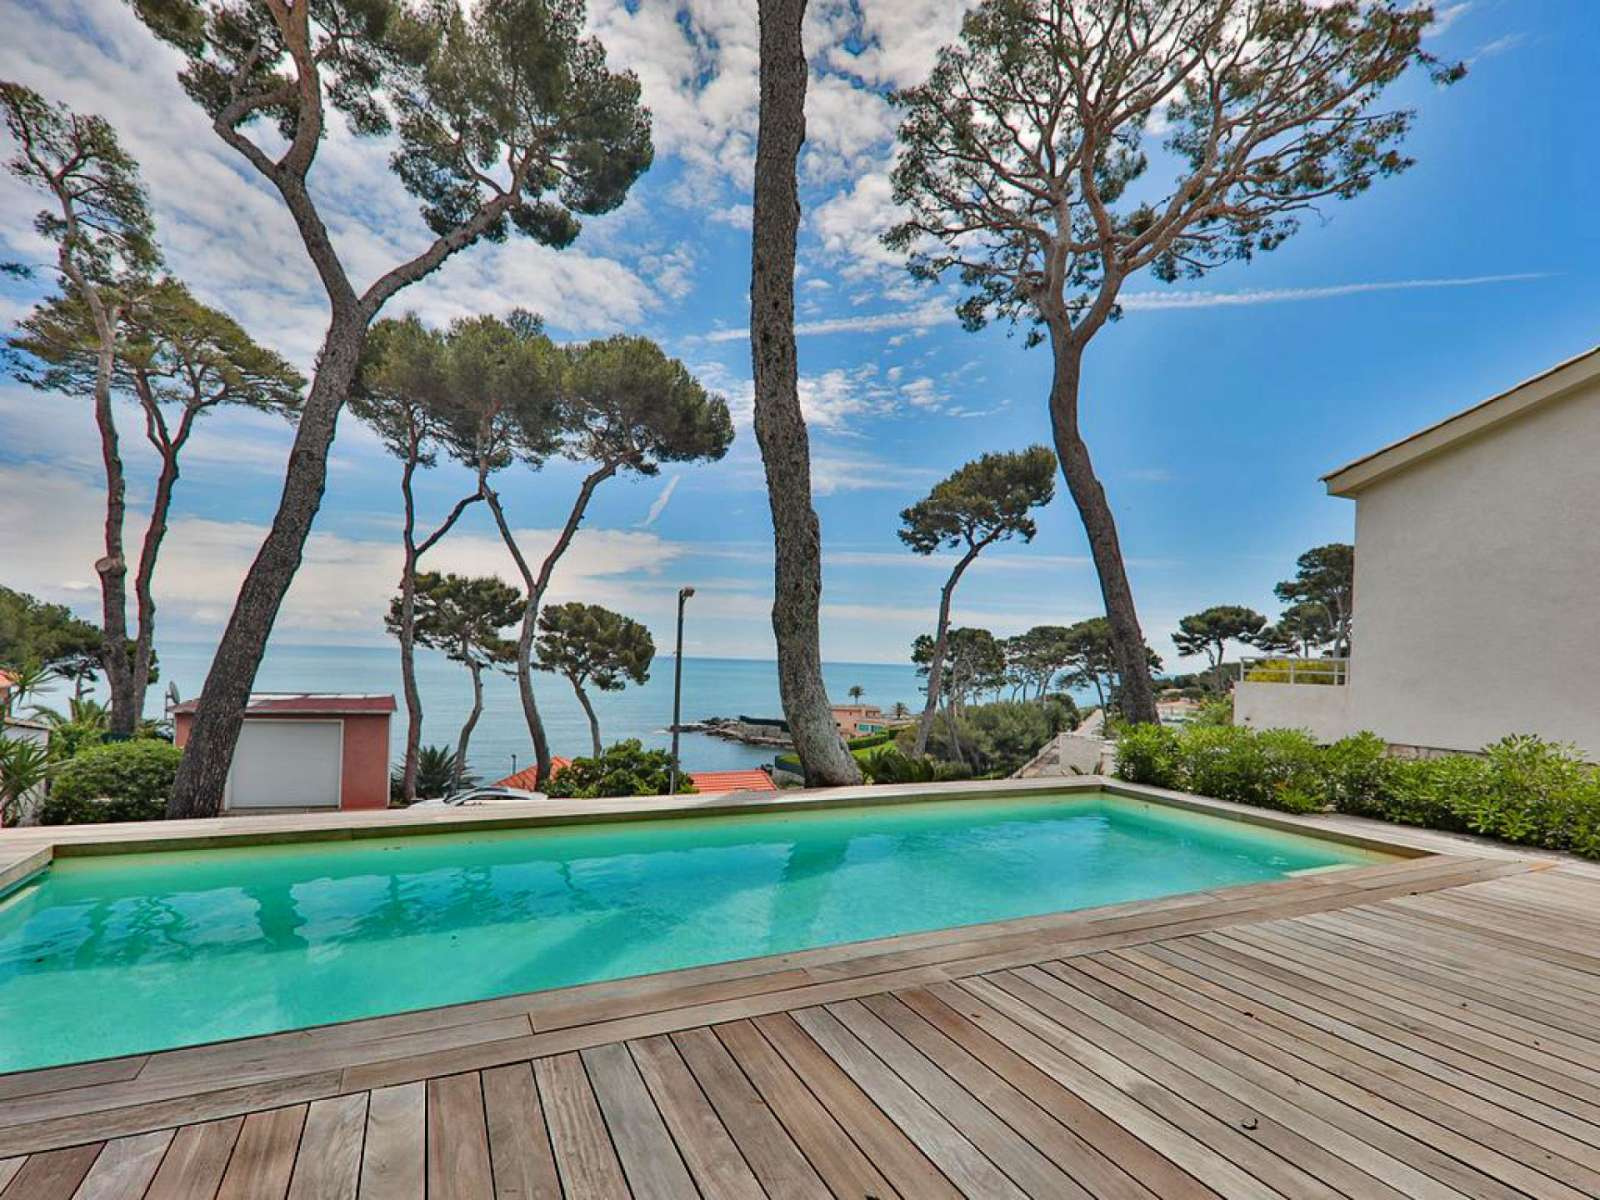 House for rent in Cap d'Antibes